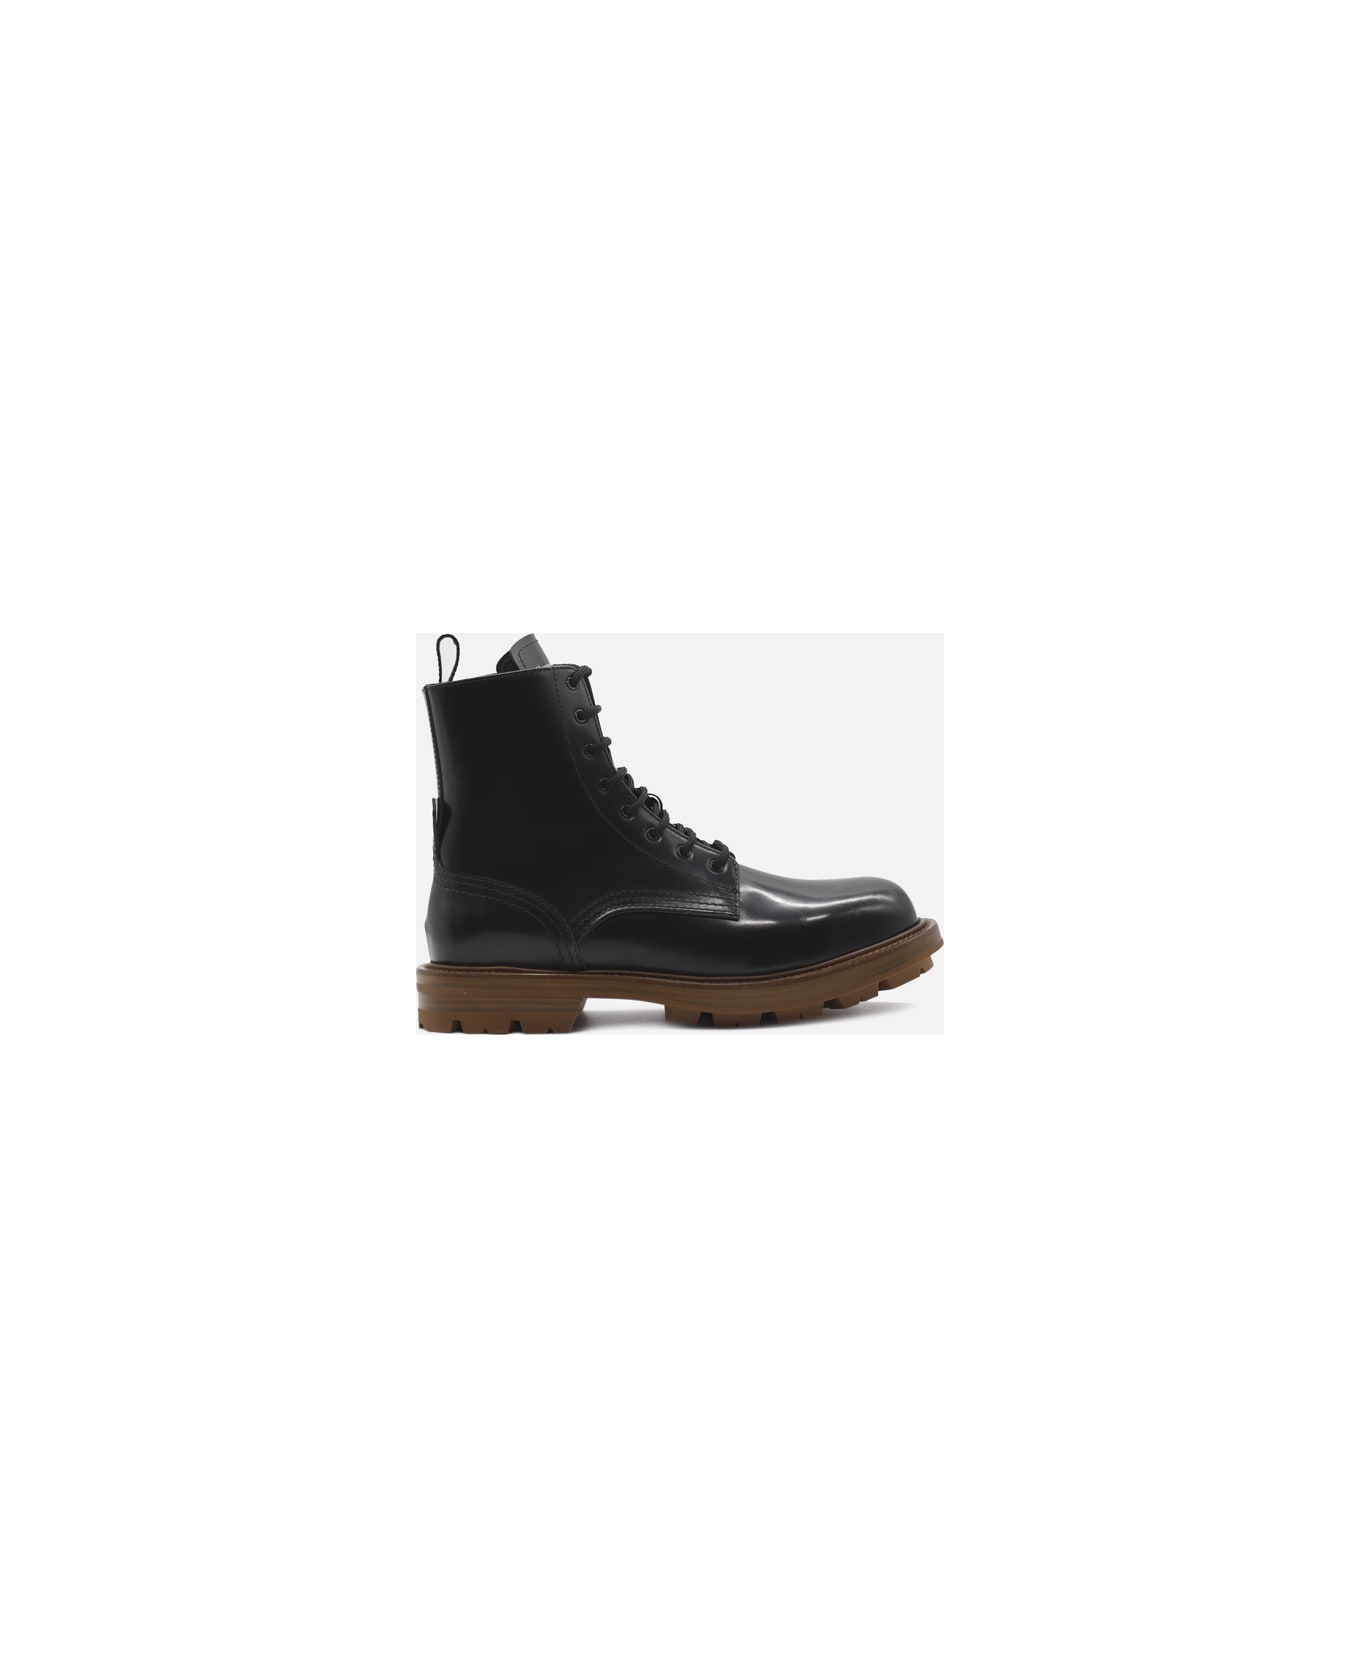 Alexander McQueen Worker Leather Ankle Boots - Black